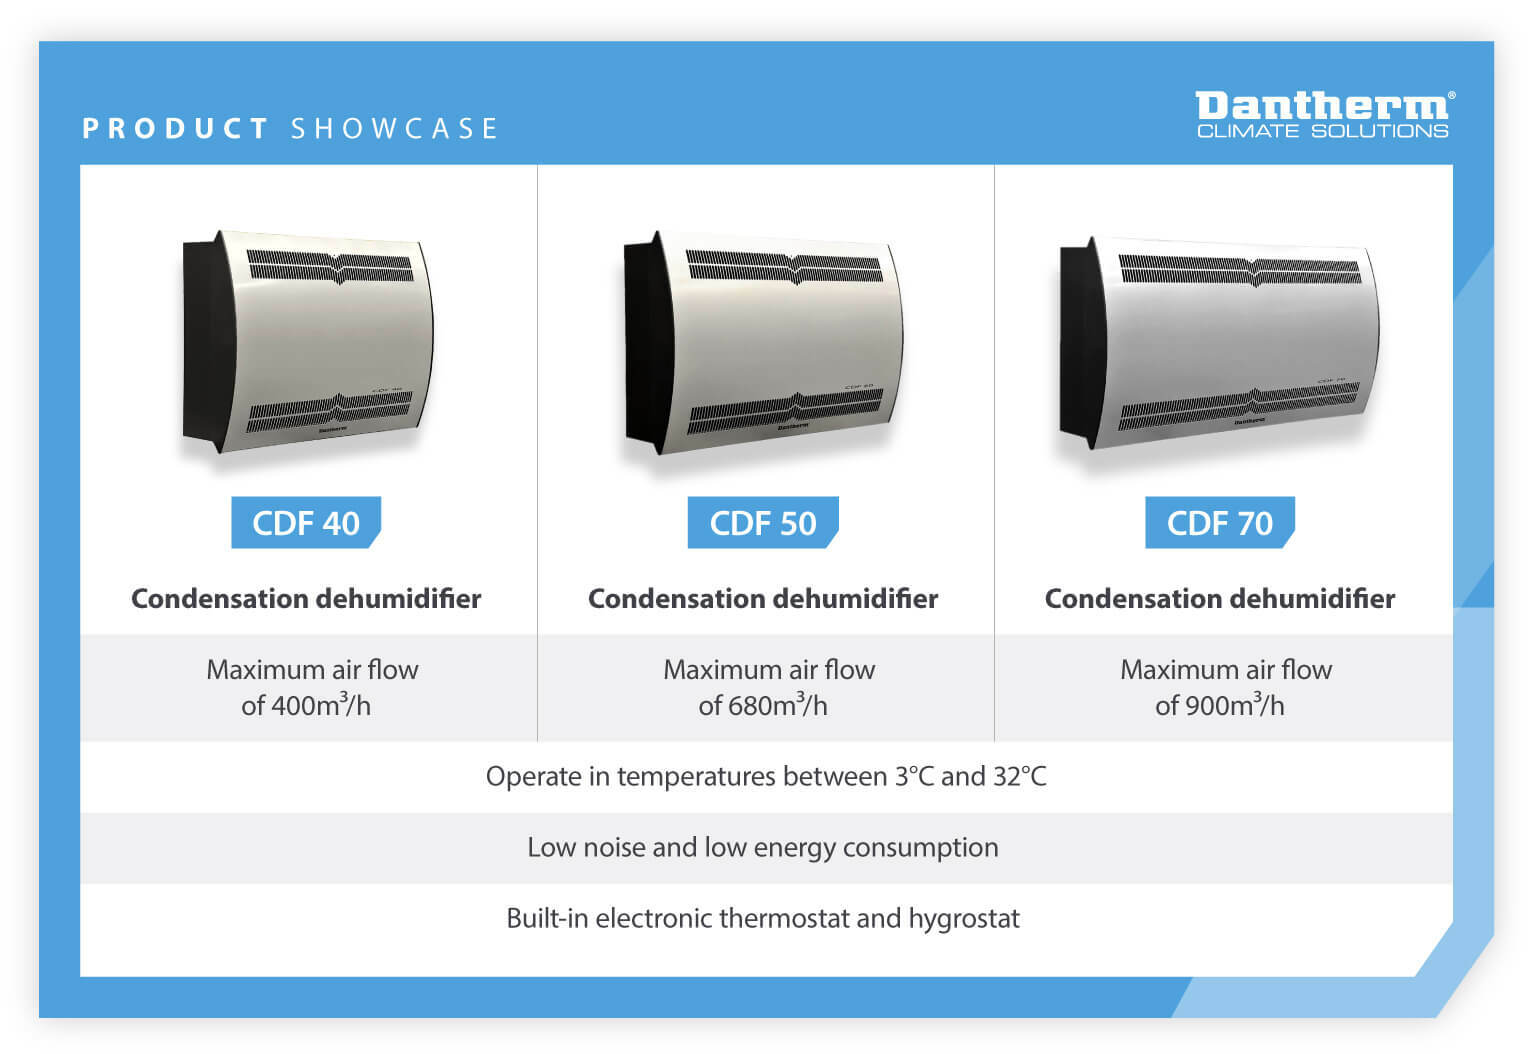 Product showcase and comparison - 3 condensation dehumidifiers suitable for galleries and museums to use - Infographic image